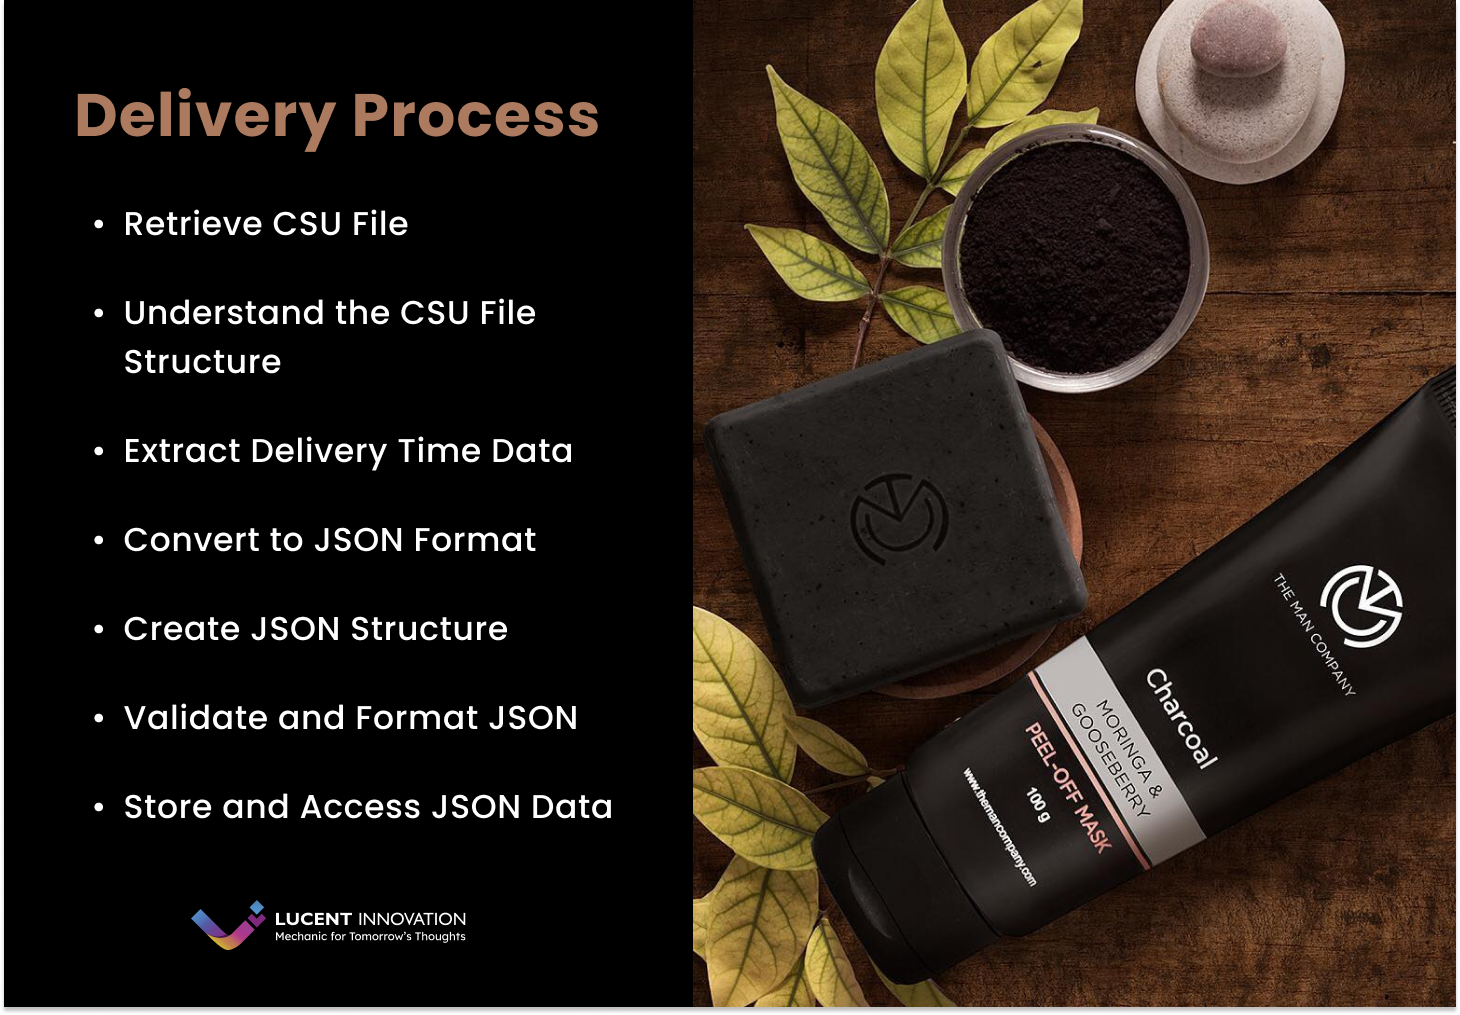 Delivery Process TMC